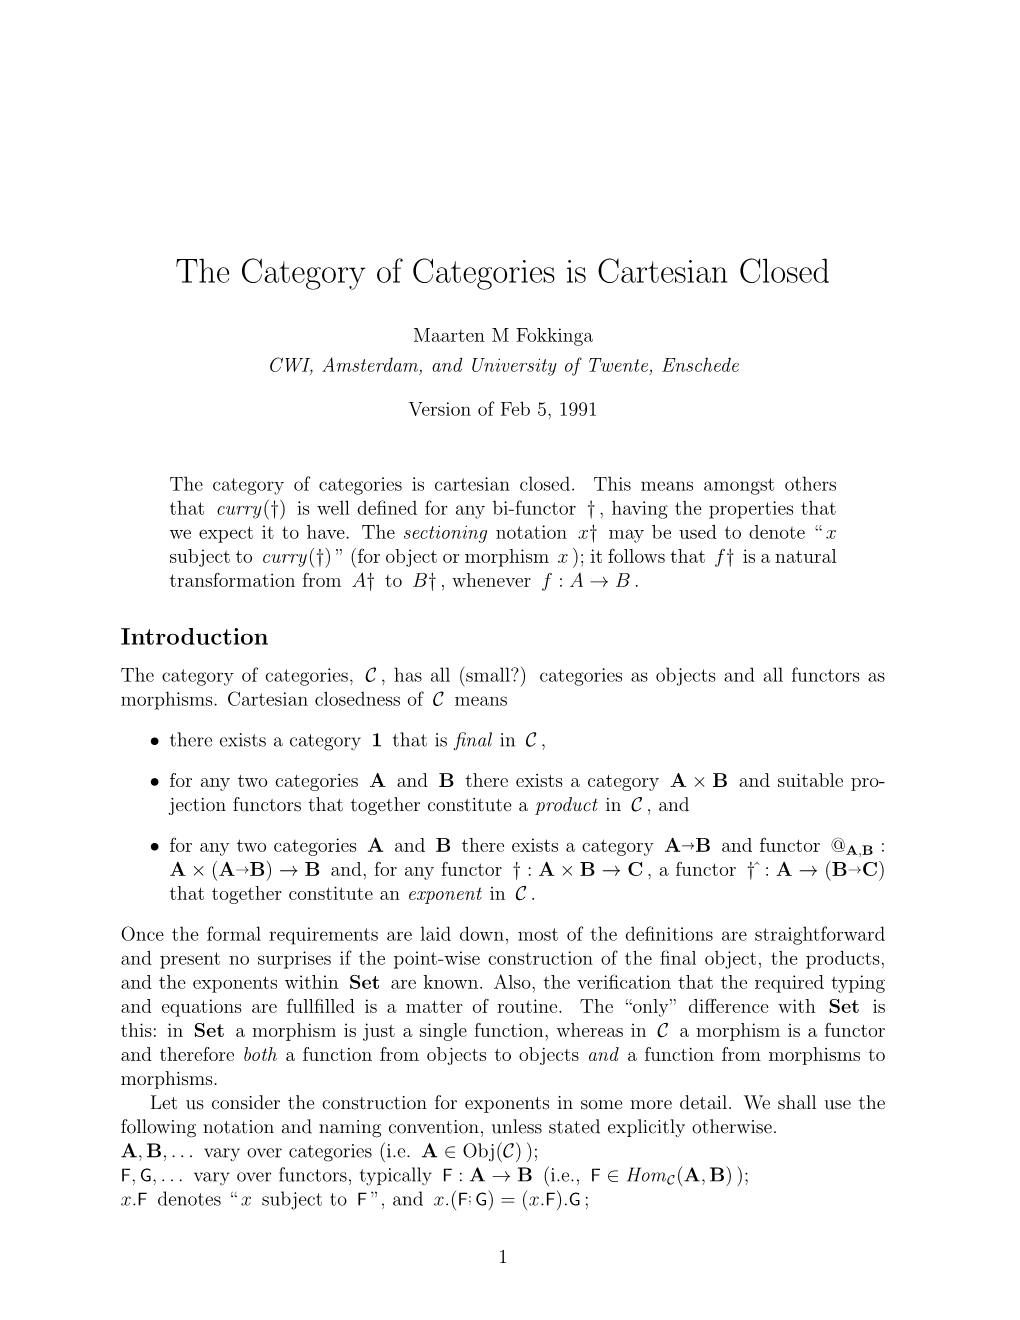 The Category of Categories Is Cartesian Closed